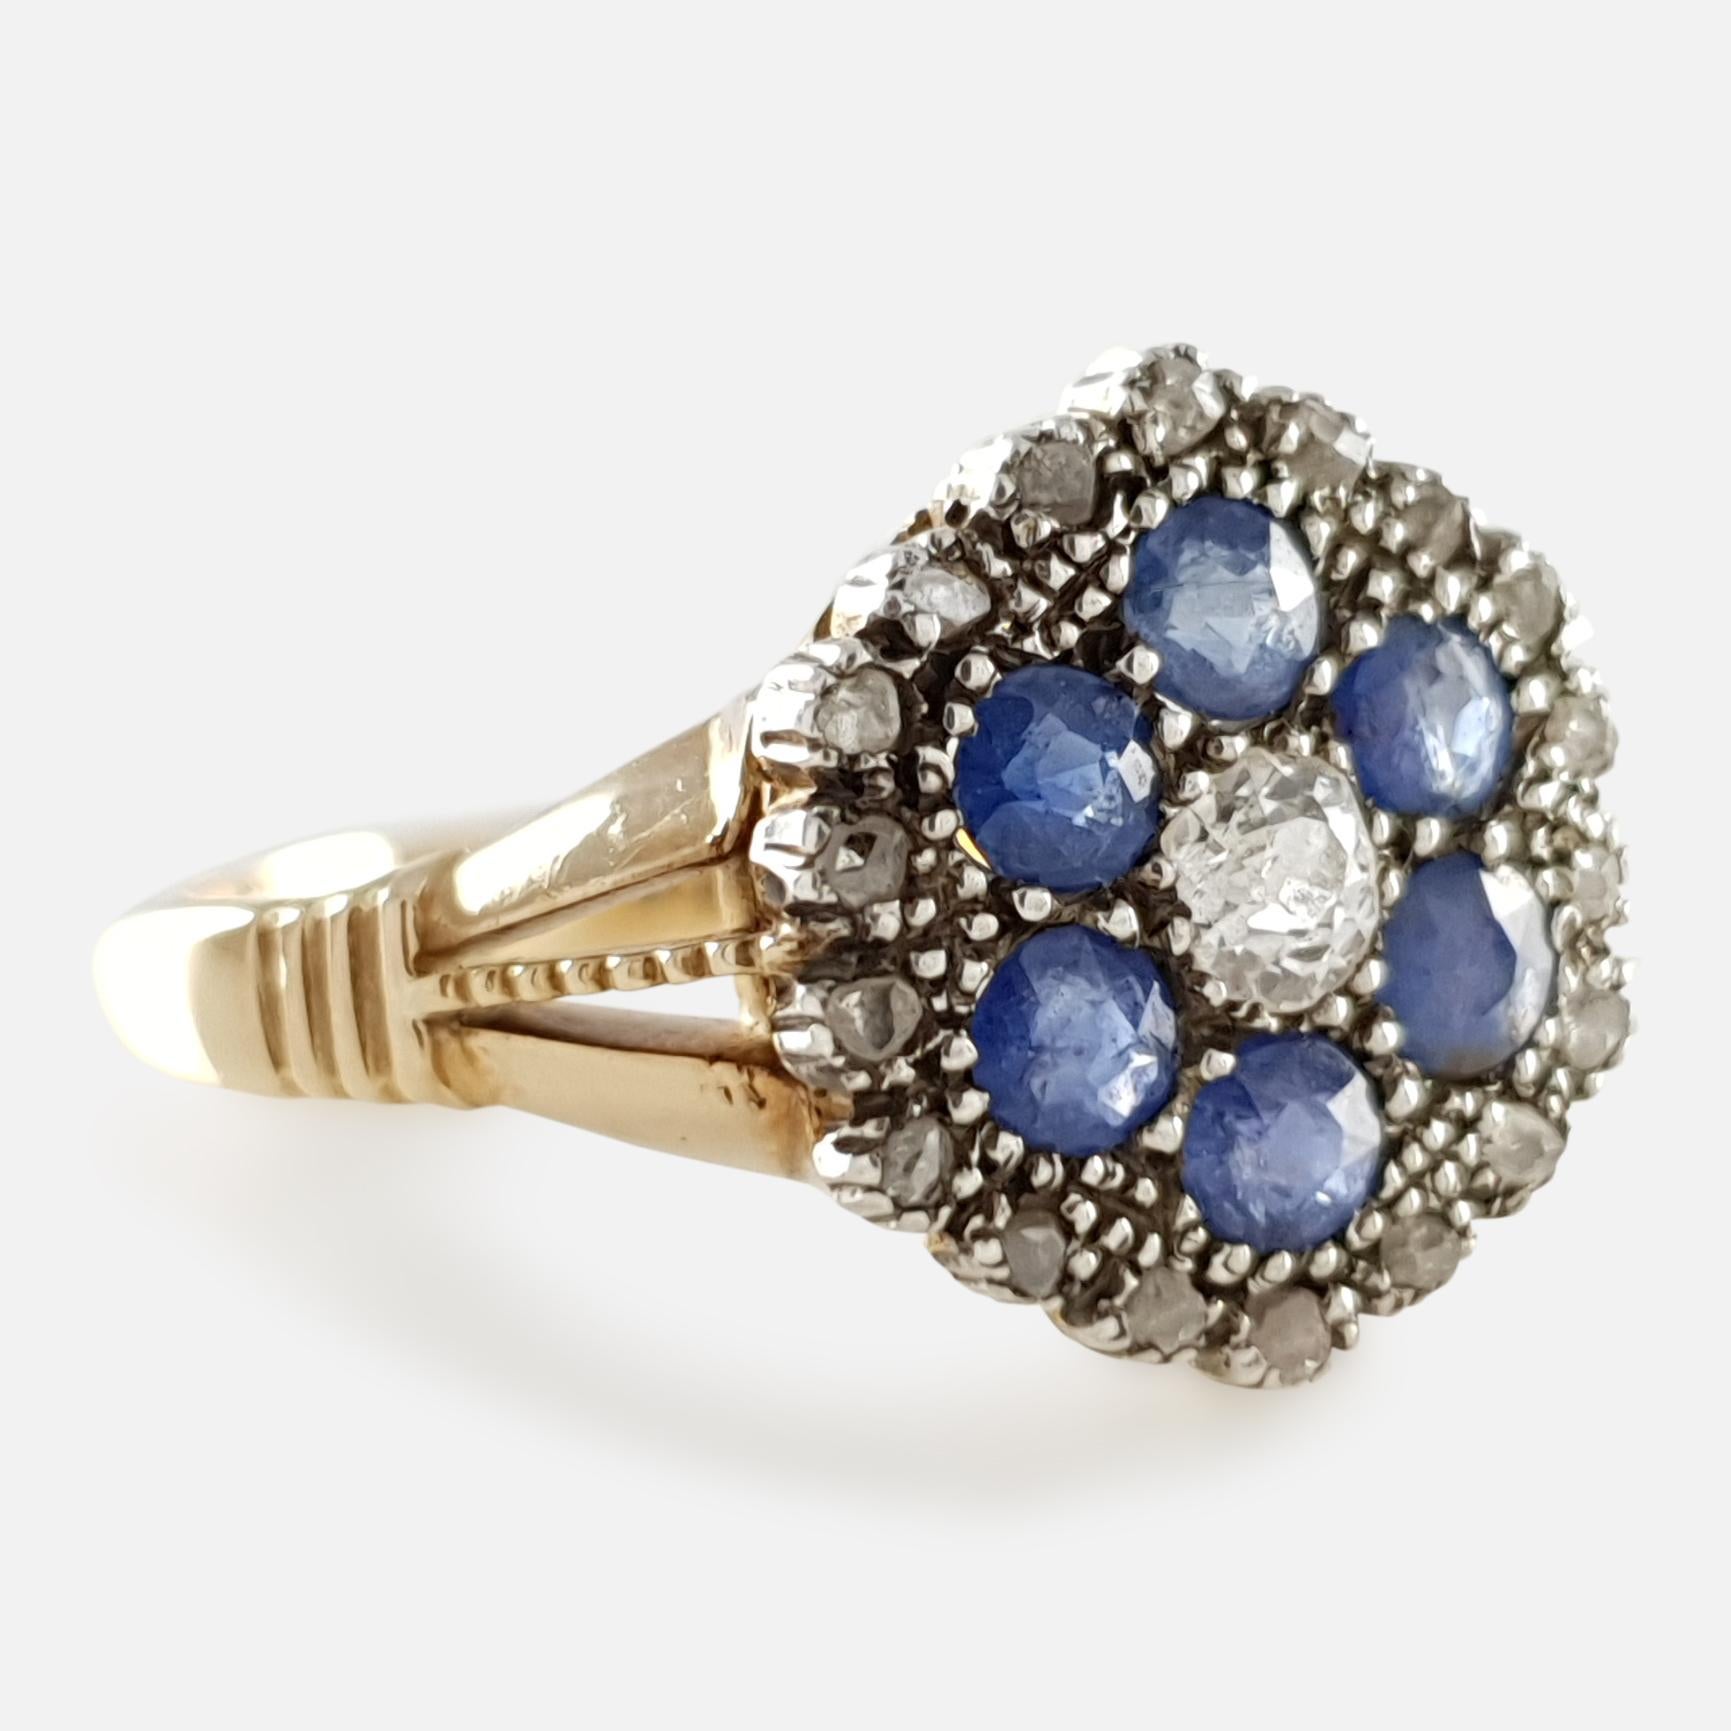 Description: - A fine antique Edwardian 18 karat gold diamond and sapphire cluster ring. The ring is set with a central diamond, surrounded by 6 sapphires, and a further 16 diamonds around the perimeter in a cluster formation, set on trifurcated